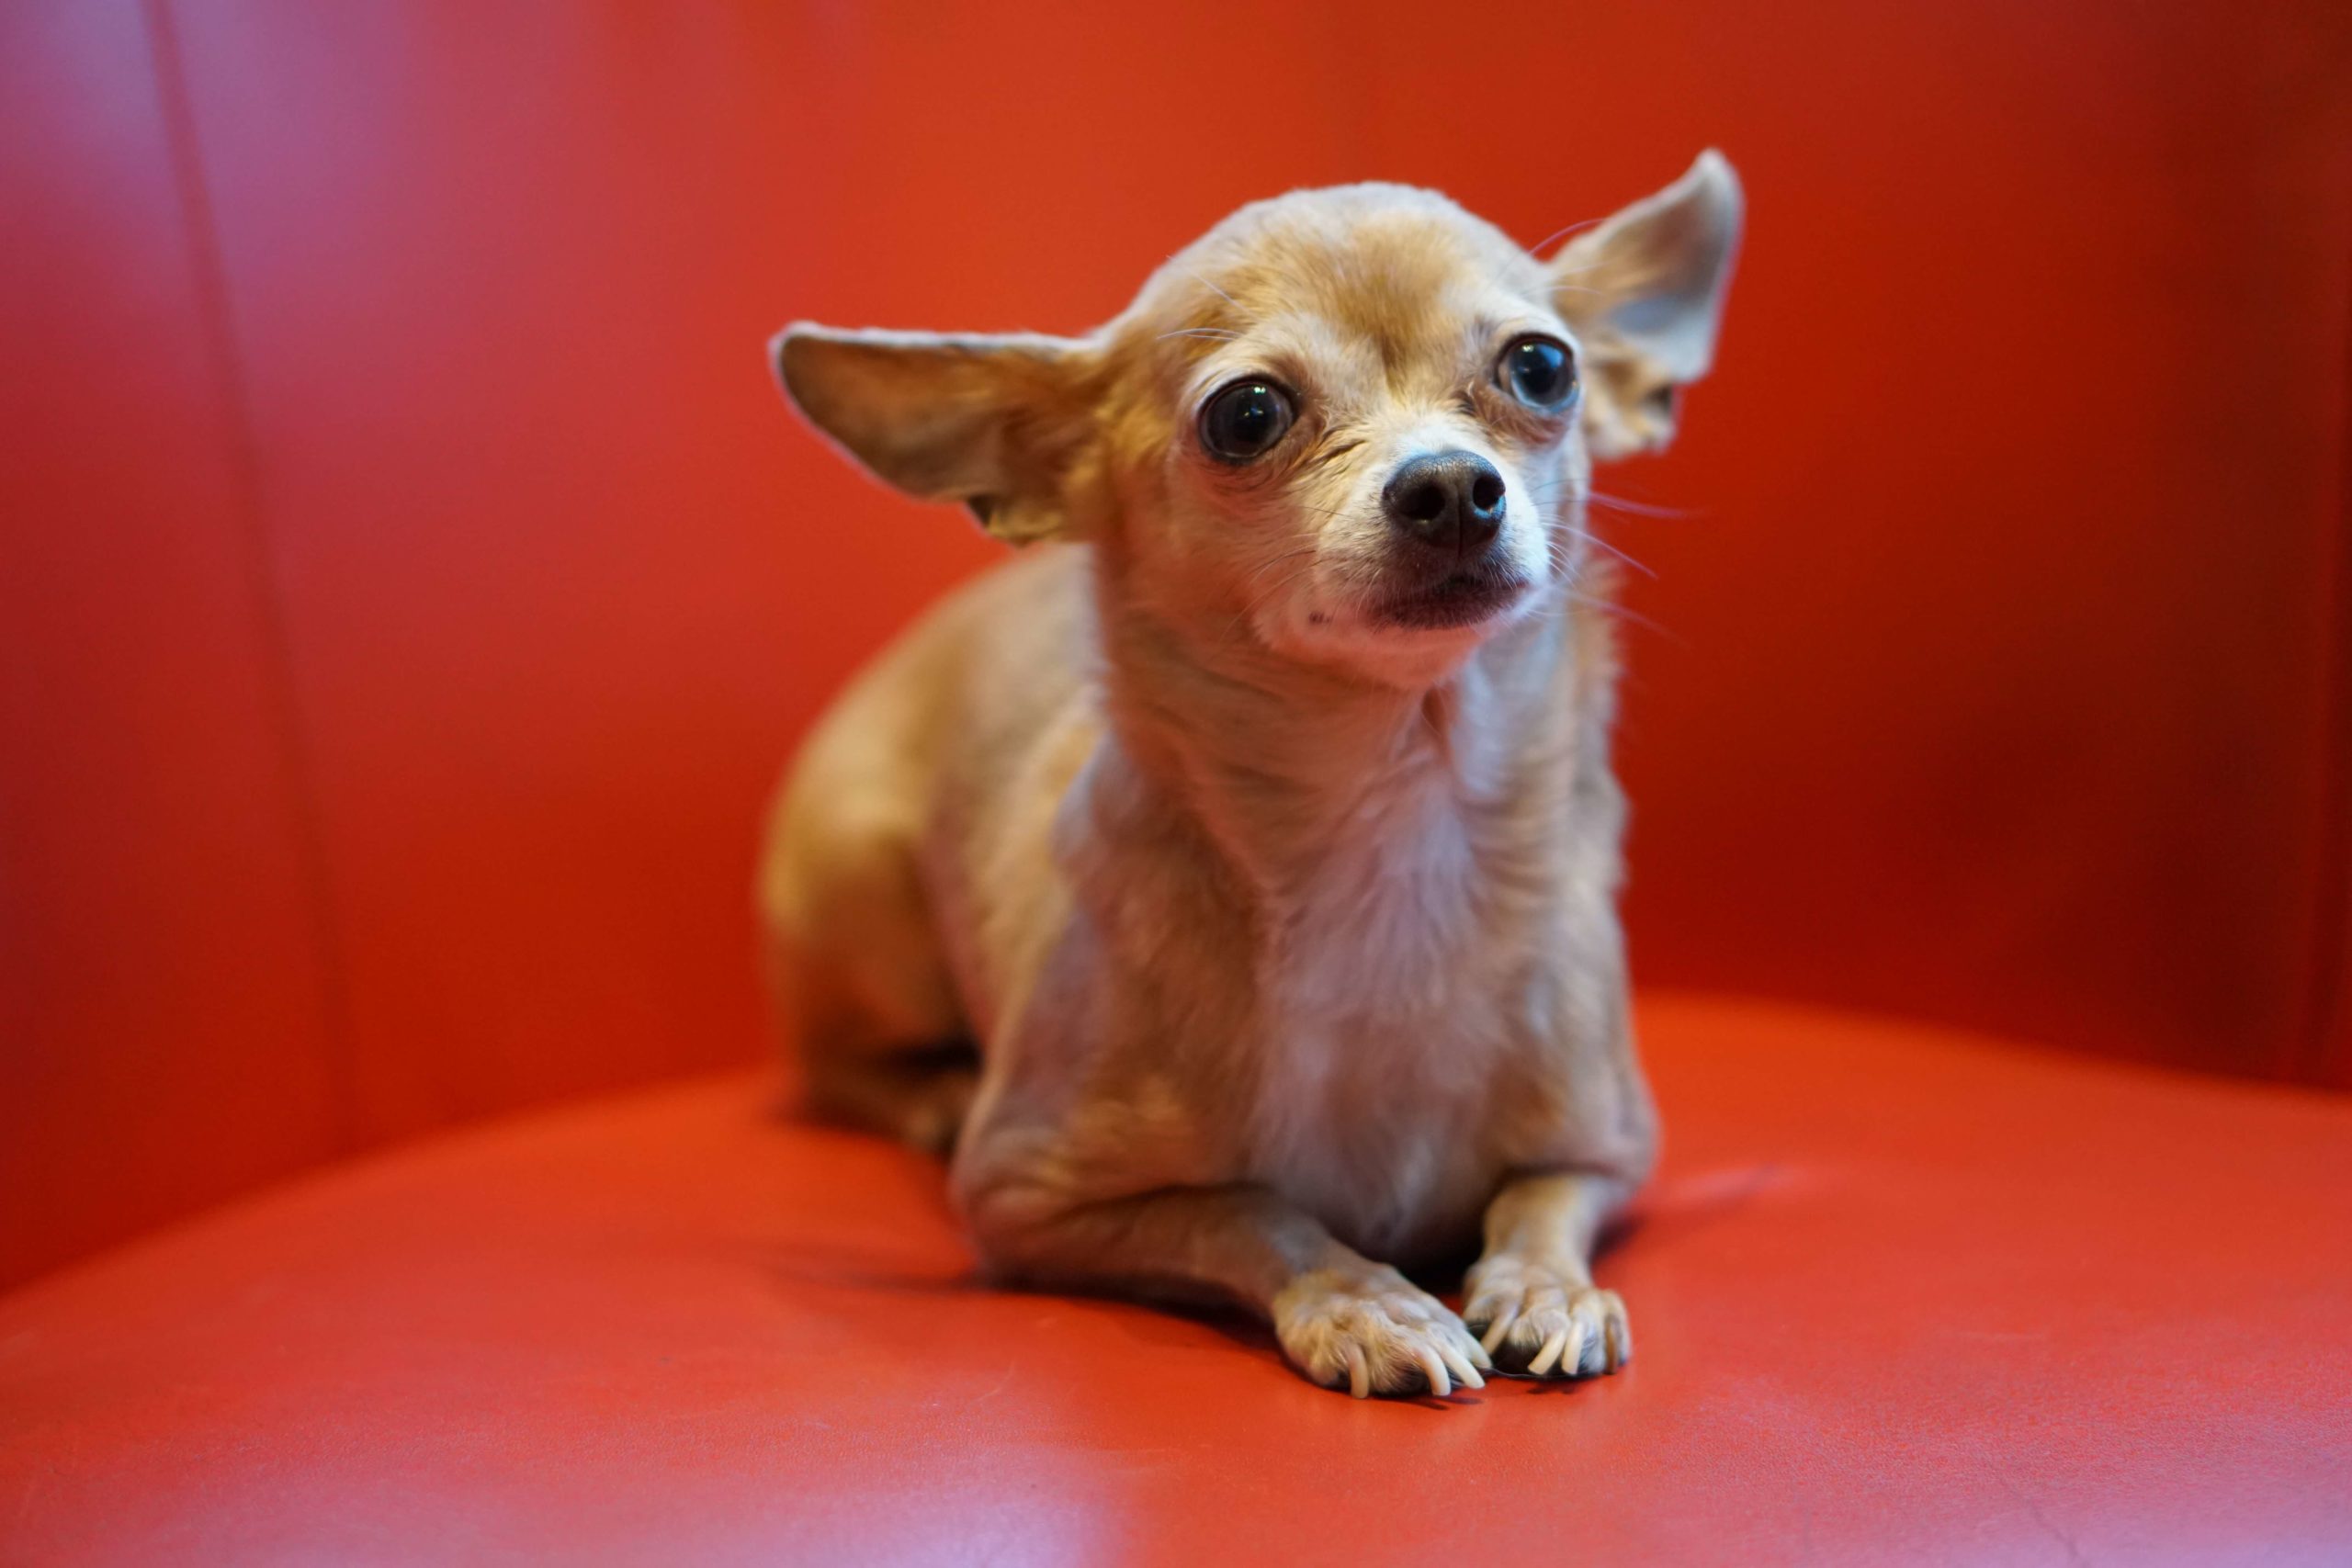 Image of a chihuaha - this post details how much they weigh